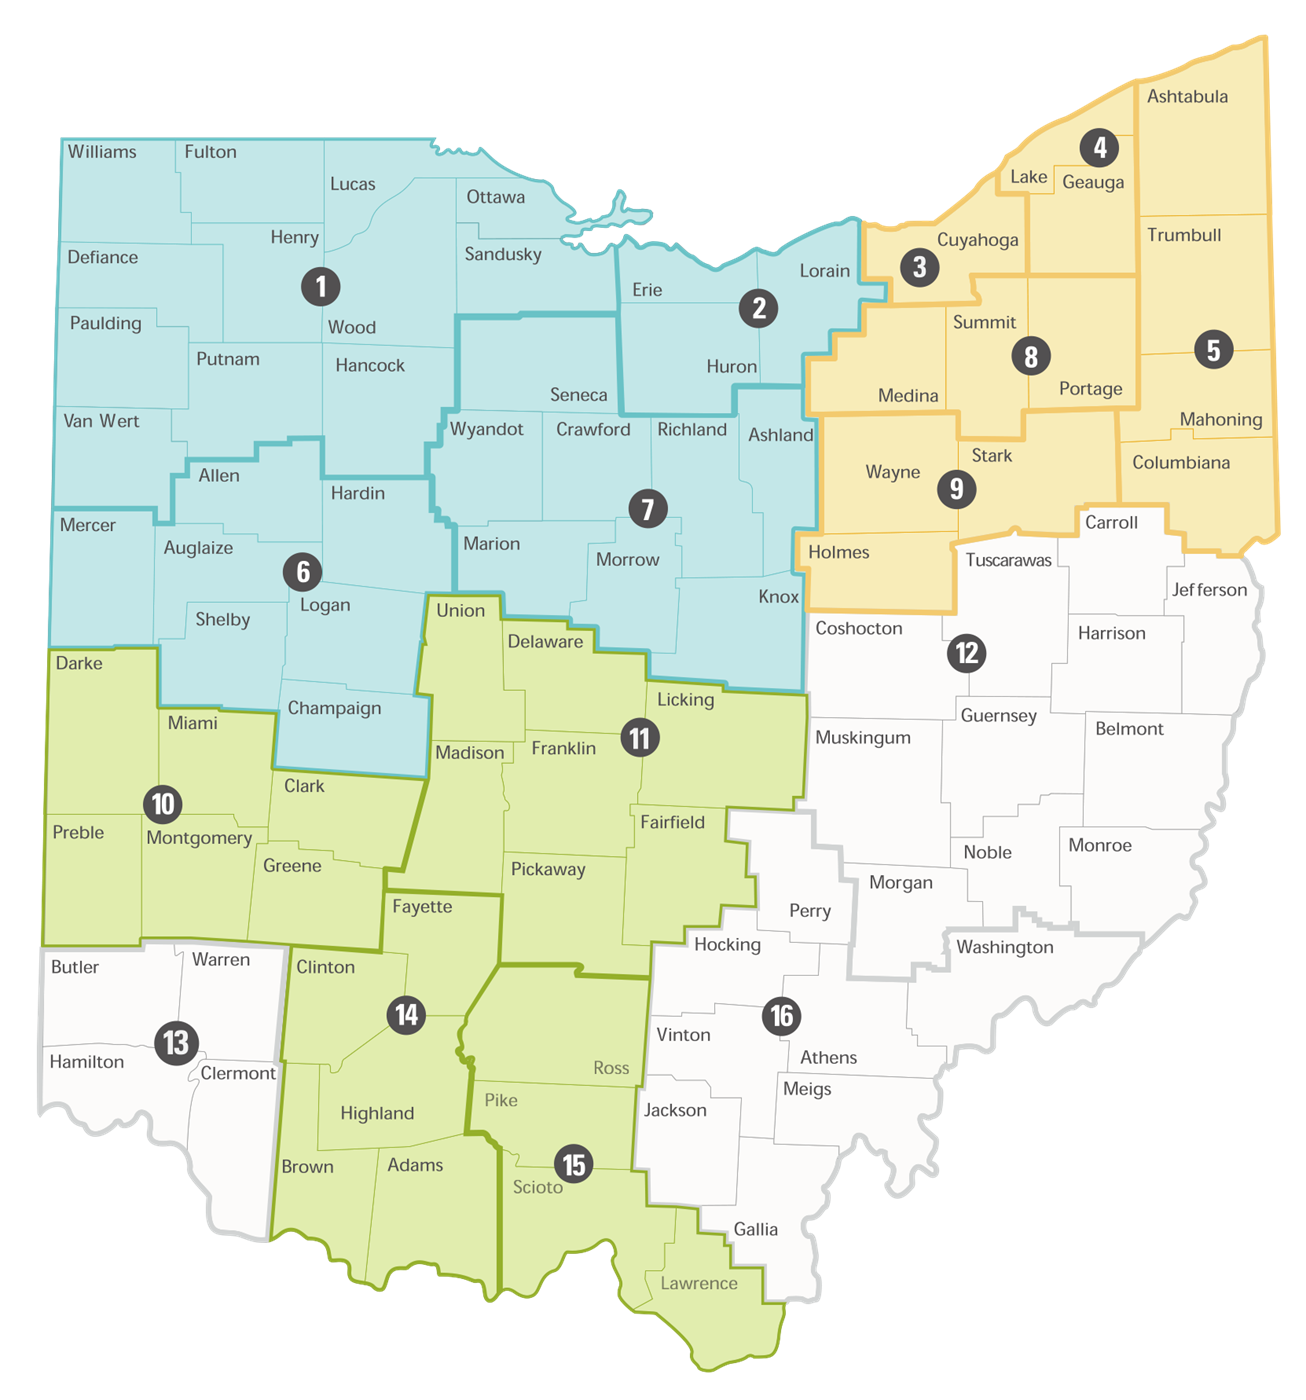 Preschool and School Age Child Care Licensing and Step Up To Quality regional map showing 9 regions and their specialists. Those county regions are written out on the page following the link